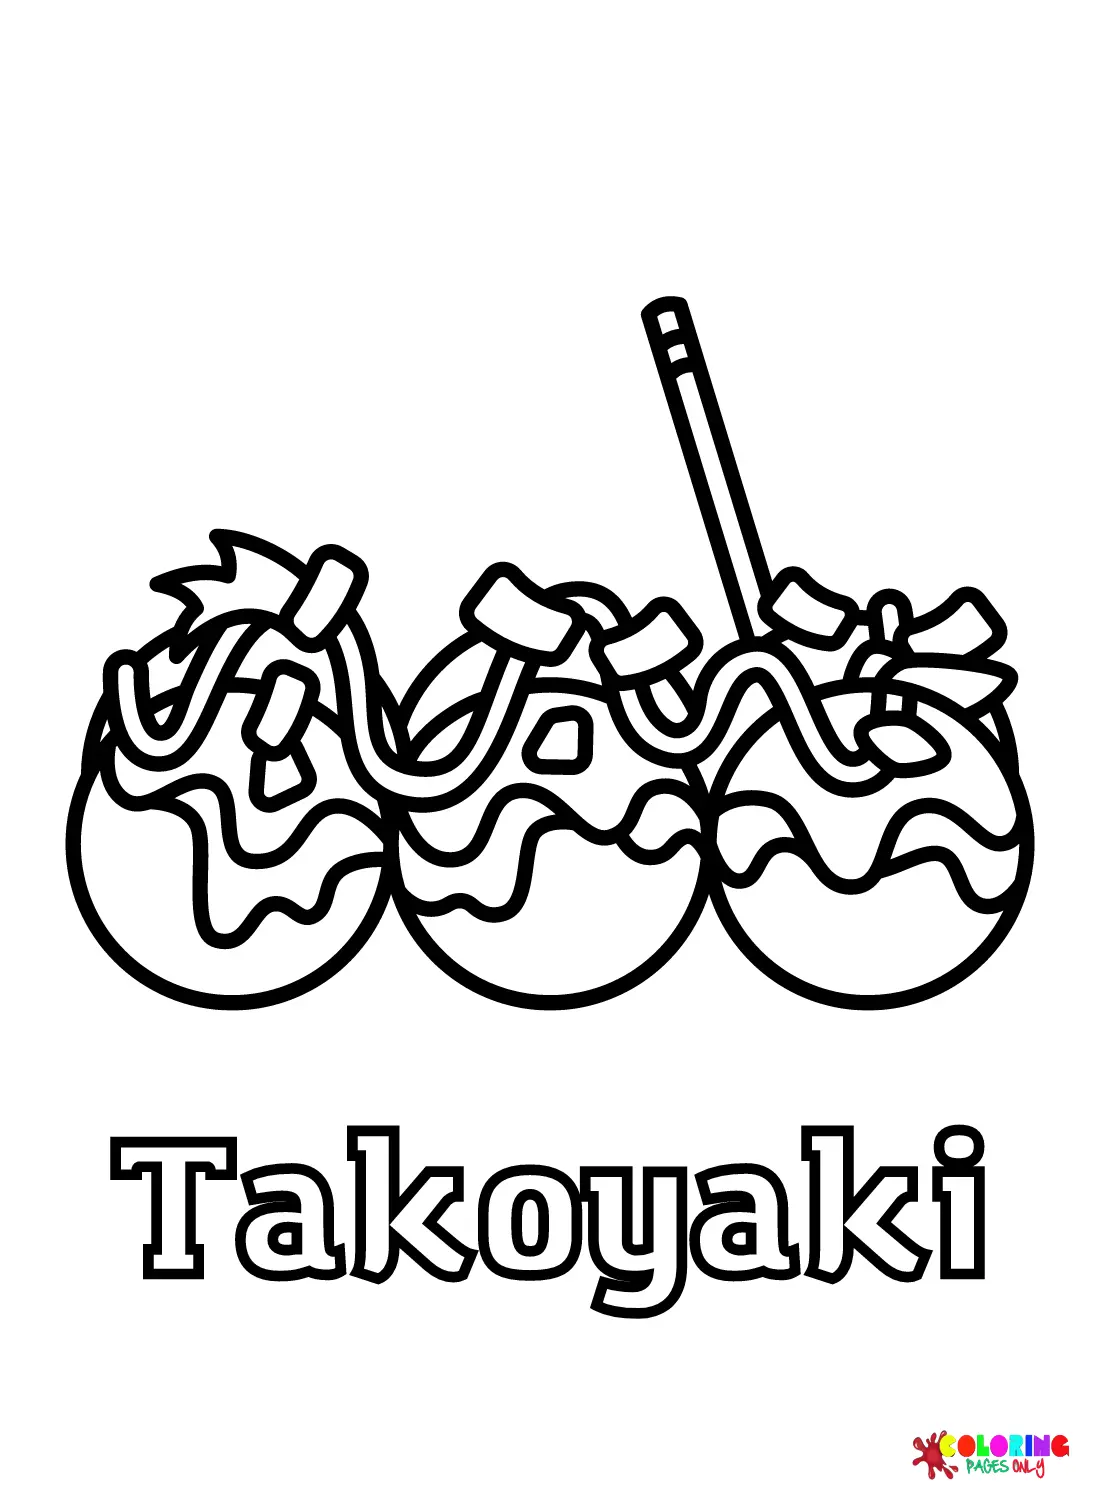 Takoyaki Coloring Pages